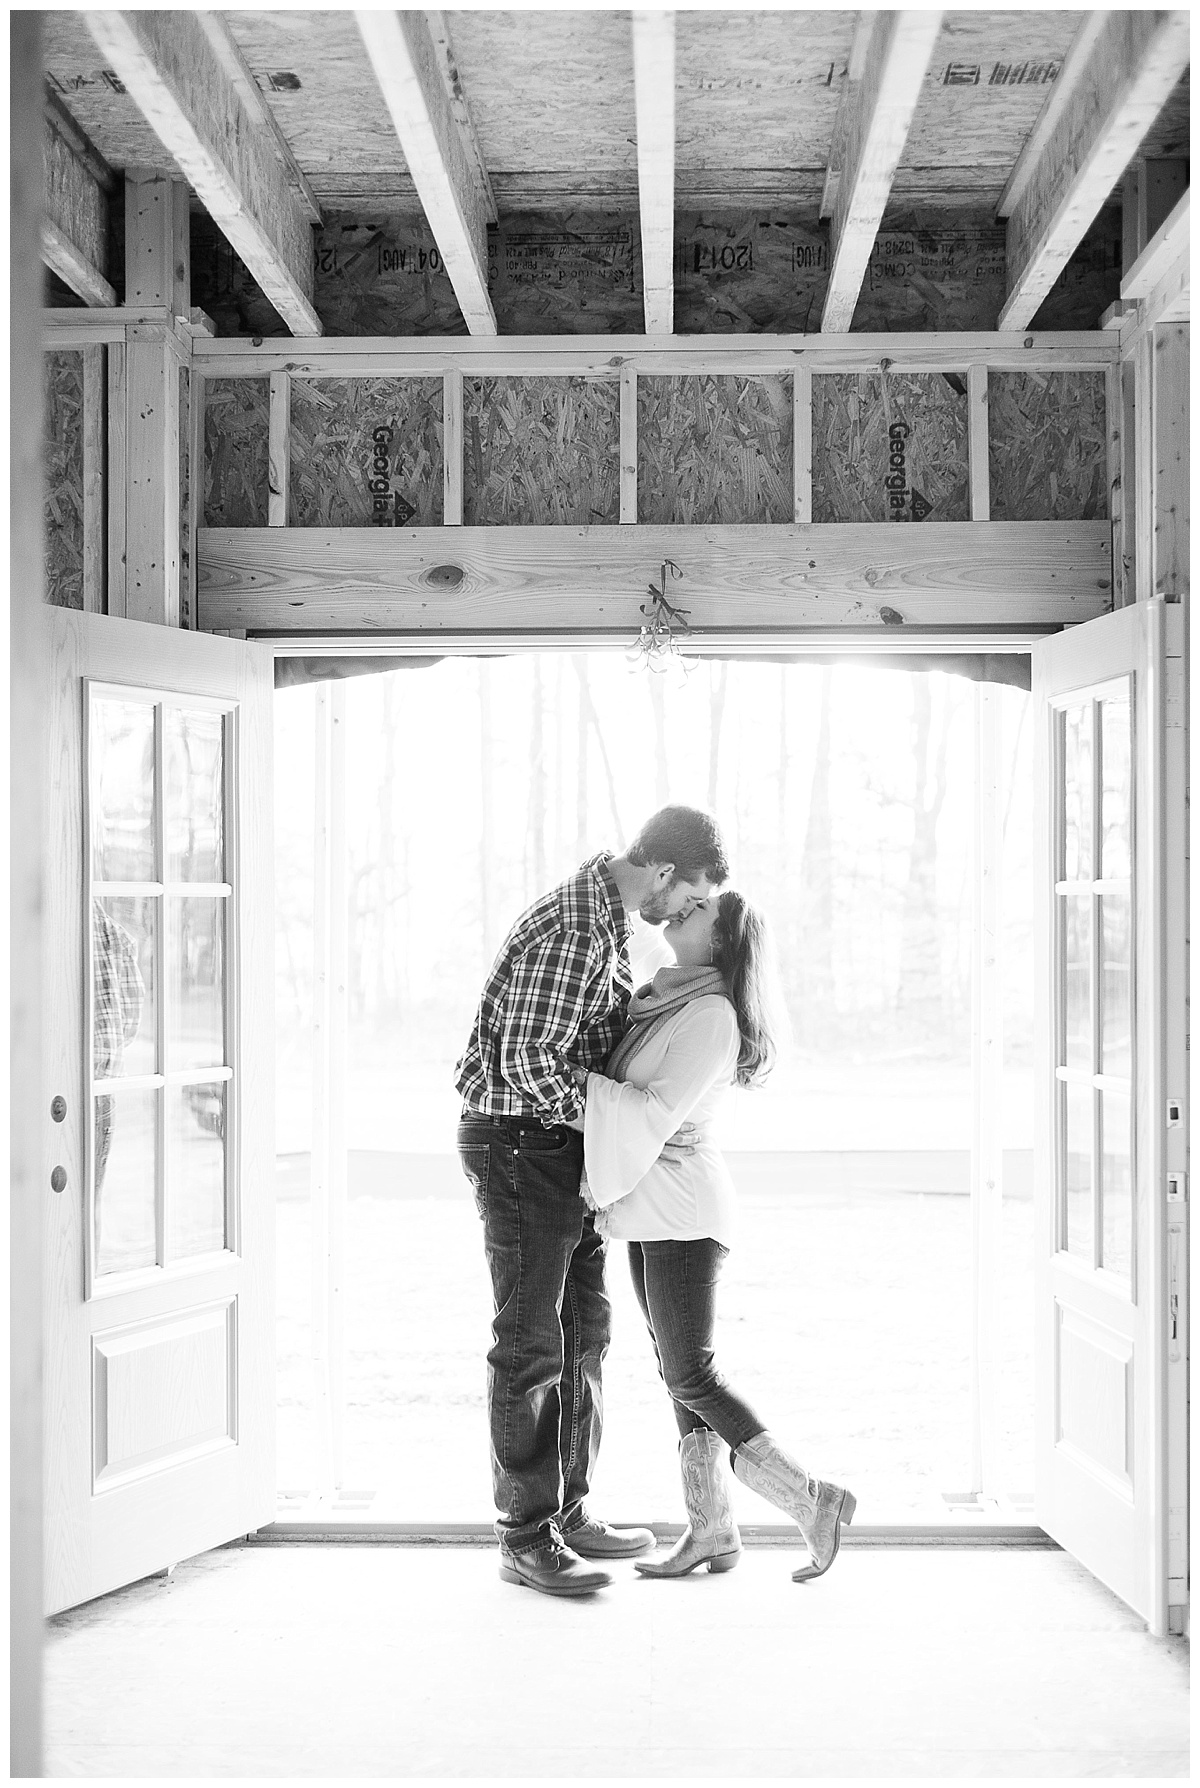 New Construction, Building a house, Family Photos, Christmas Family Photos, Christmas Card, Hanover Virginia, Richmond Photographer, Virginia Family Photographer, Mechanicsville Construction, Caiti Garter Photography